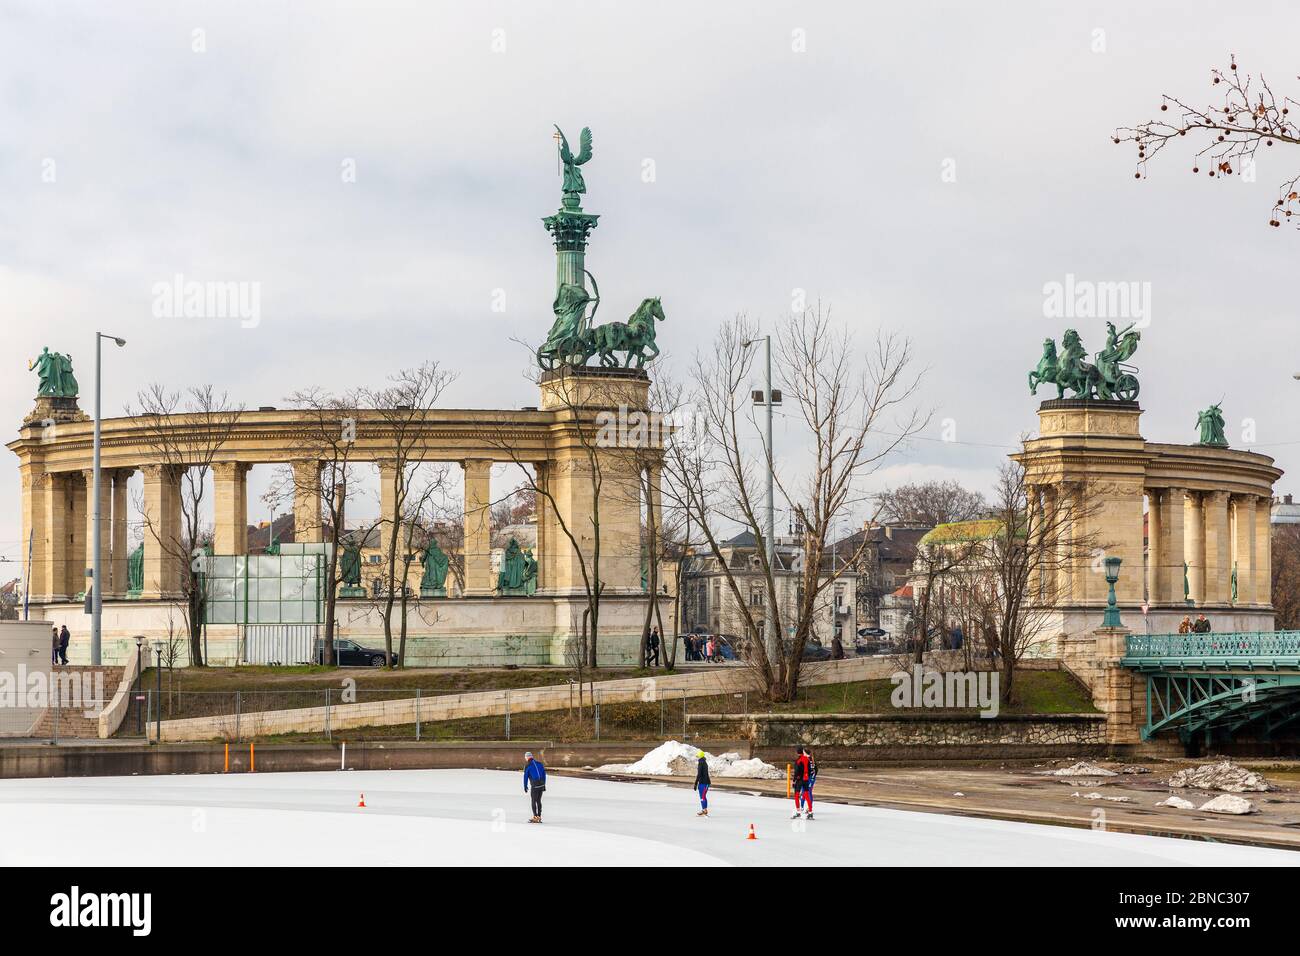 Budapest, Hungary - February 14, 2016: Heroes Square - major square in Budapest. Ice rink in city park of Budapest. People skating, athletes training Stock Photo